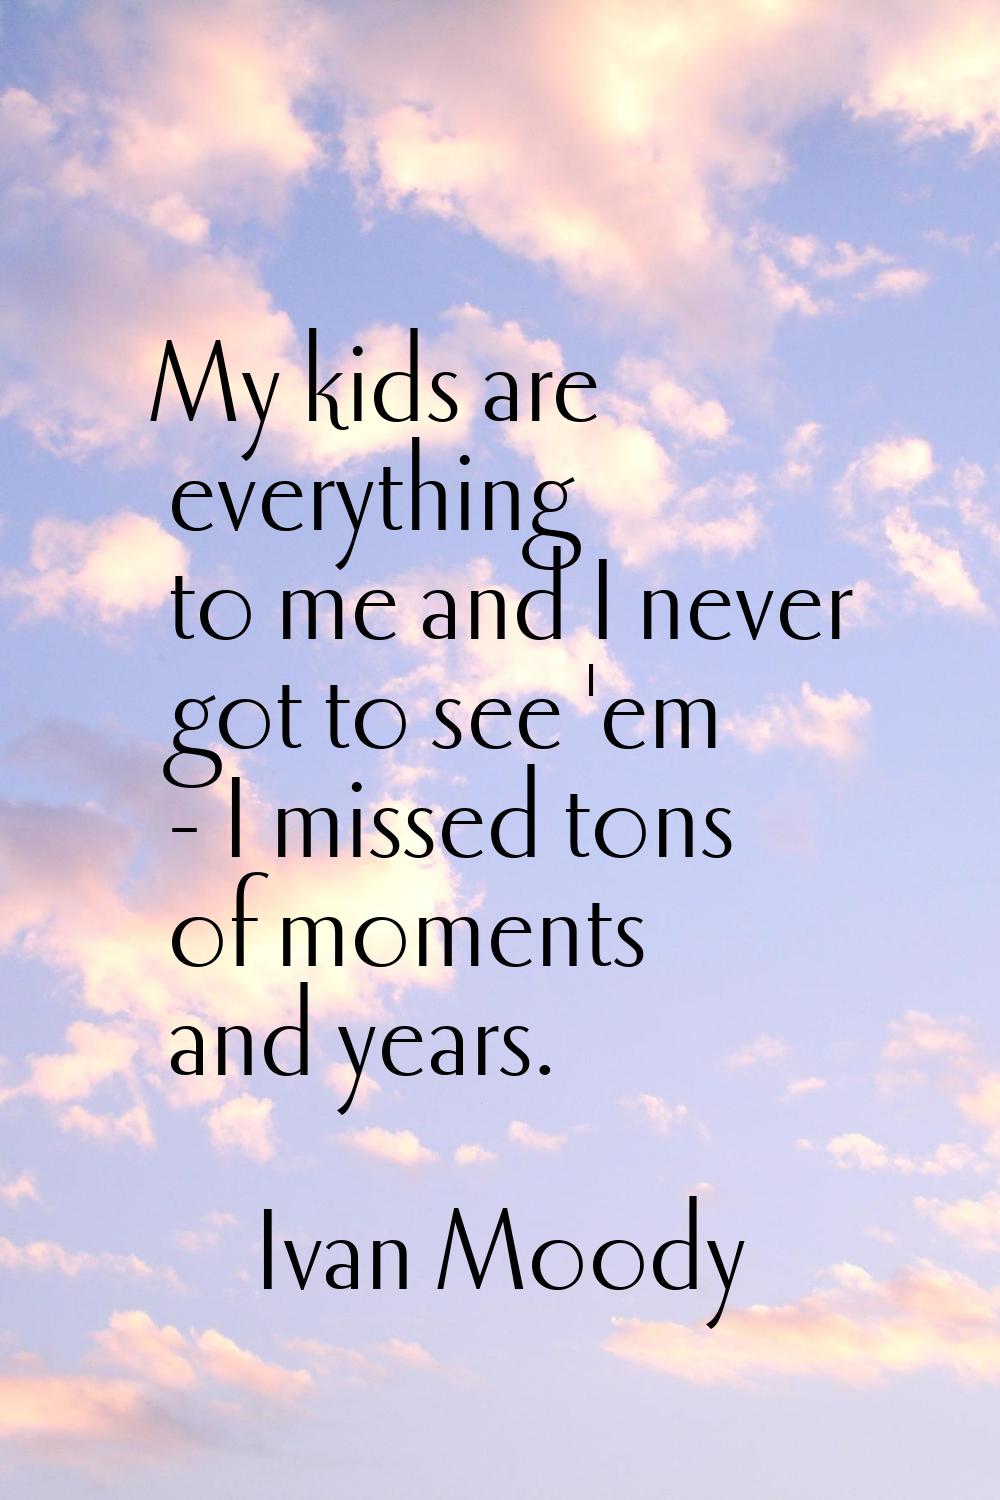 My kids are everything to me and I never got to see 'em - I missed tons of moments and years.